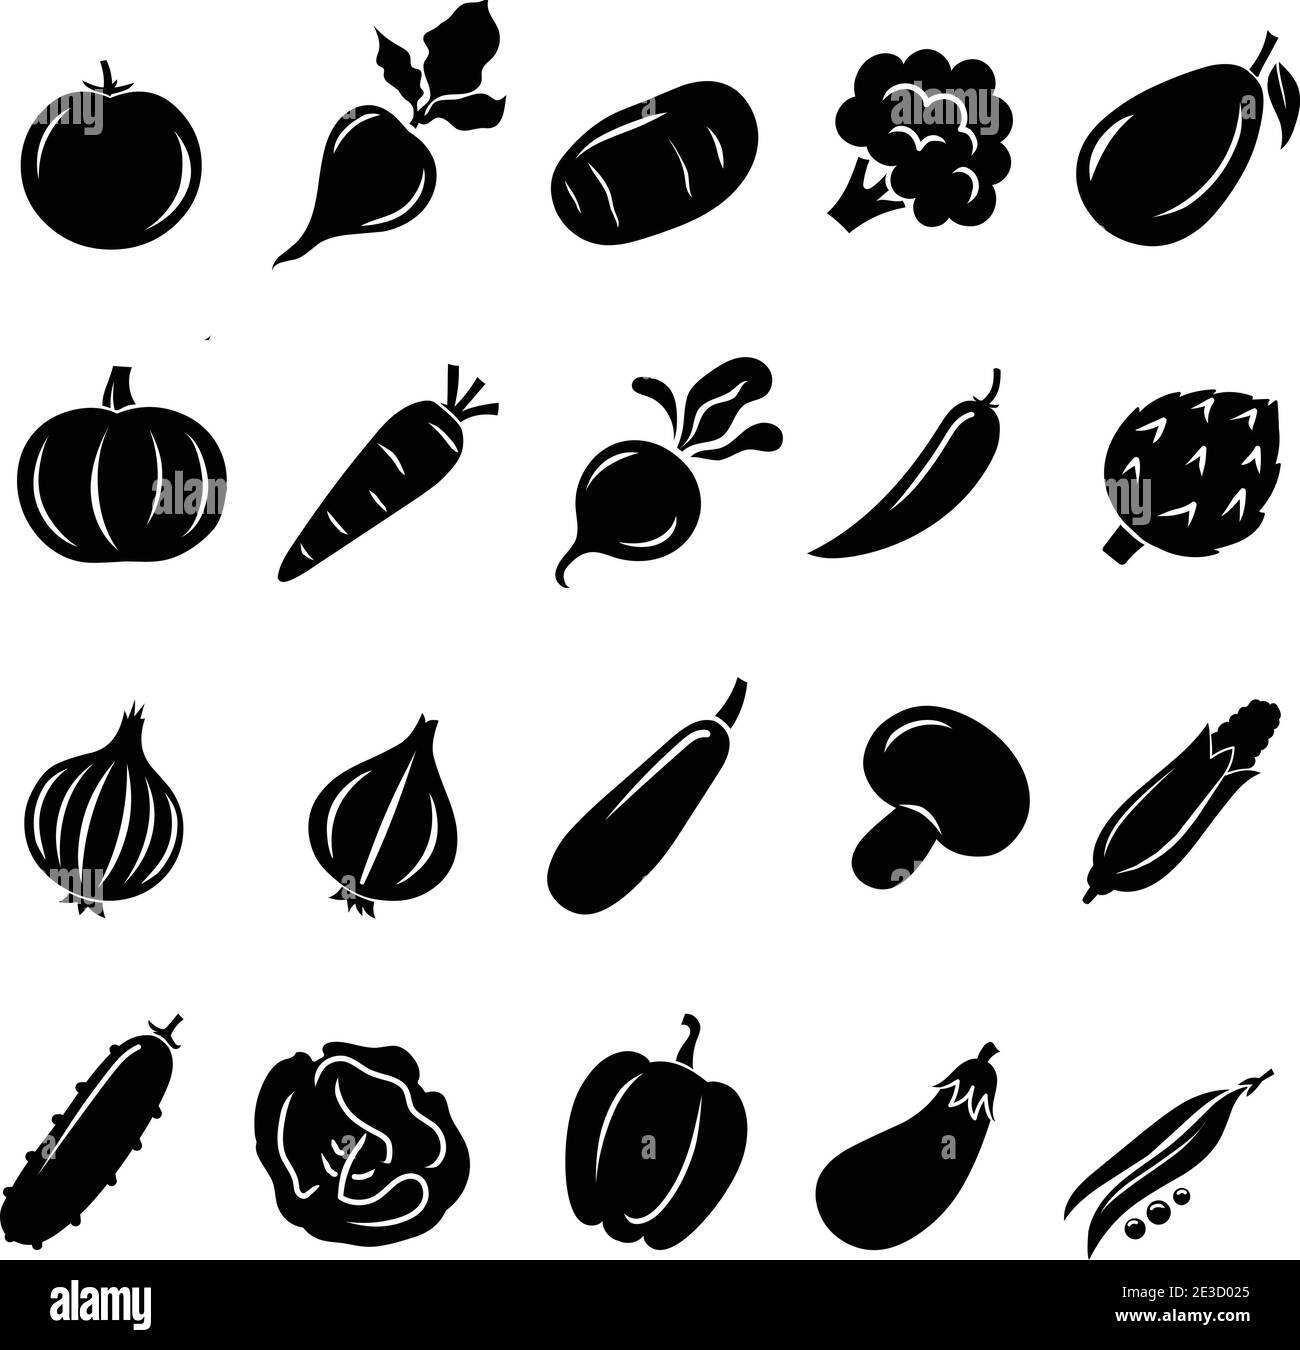 Vector silhouette of different vegetables stock illustration Stock Vector